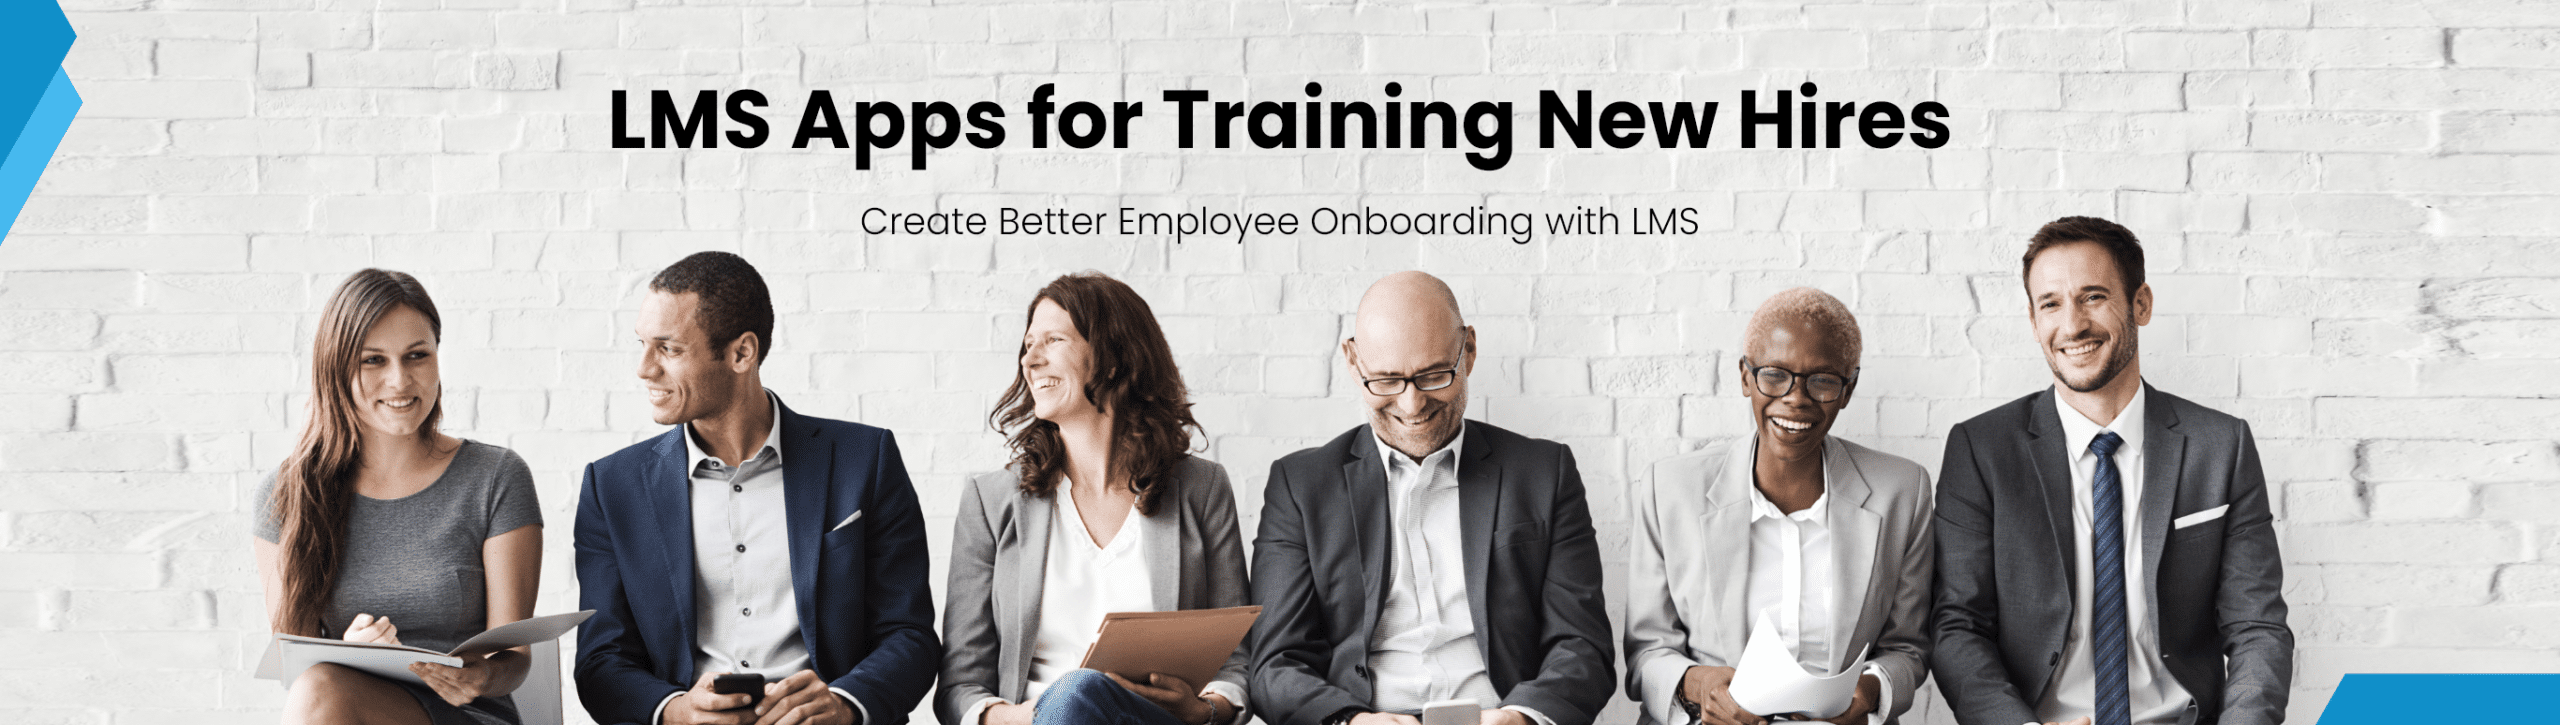 15 Best LMS Apps for Training New Hires | Paradiso Solutions